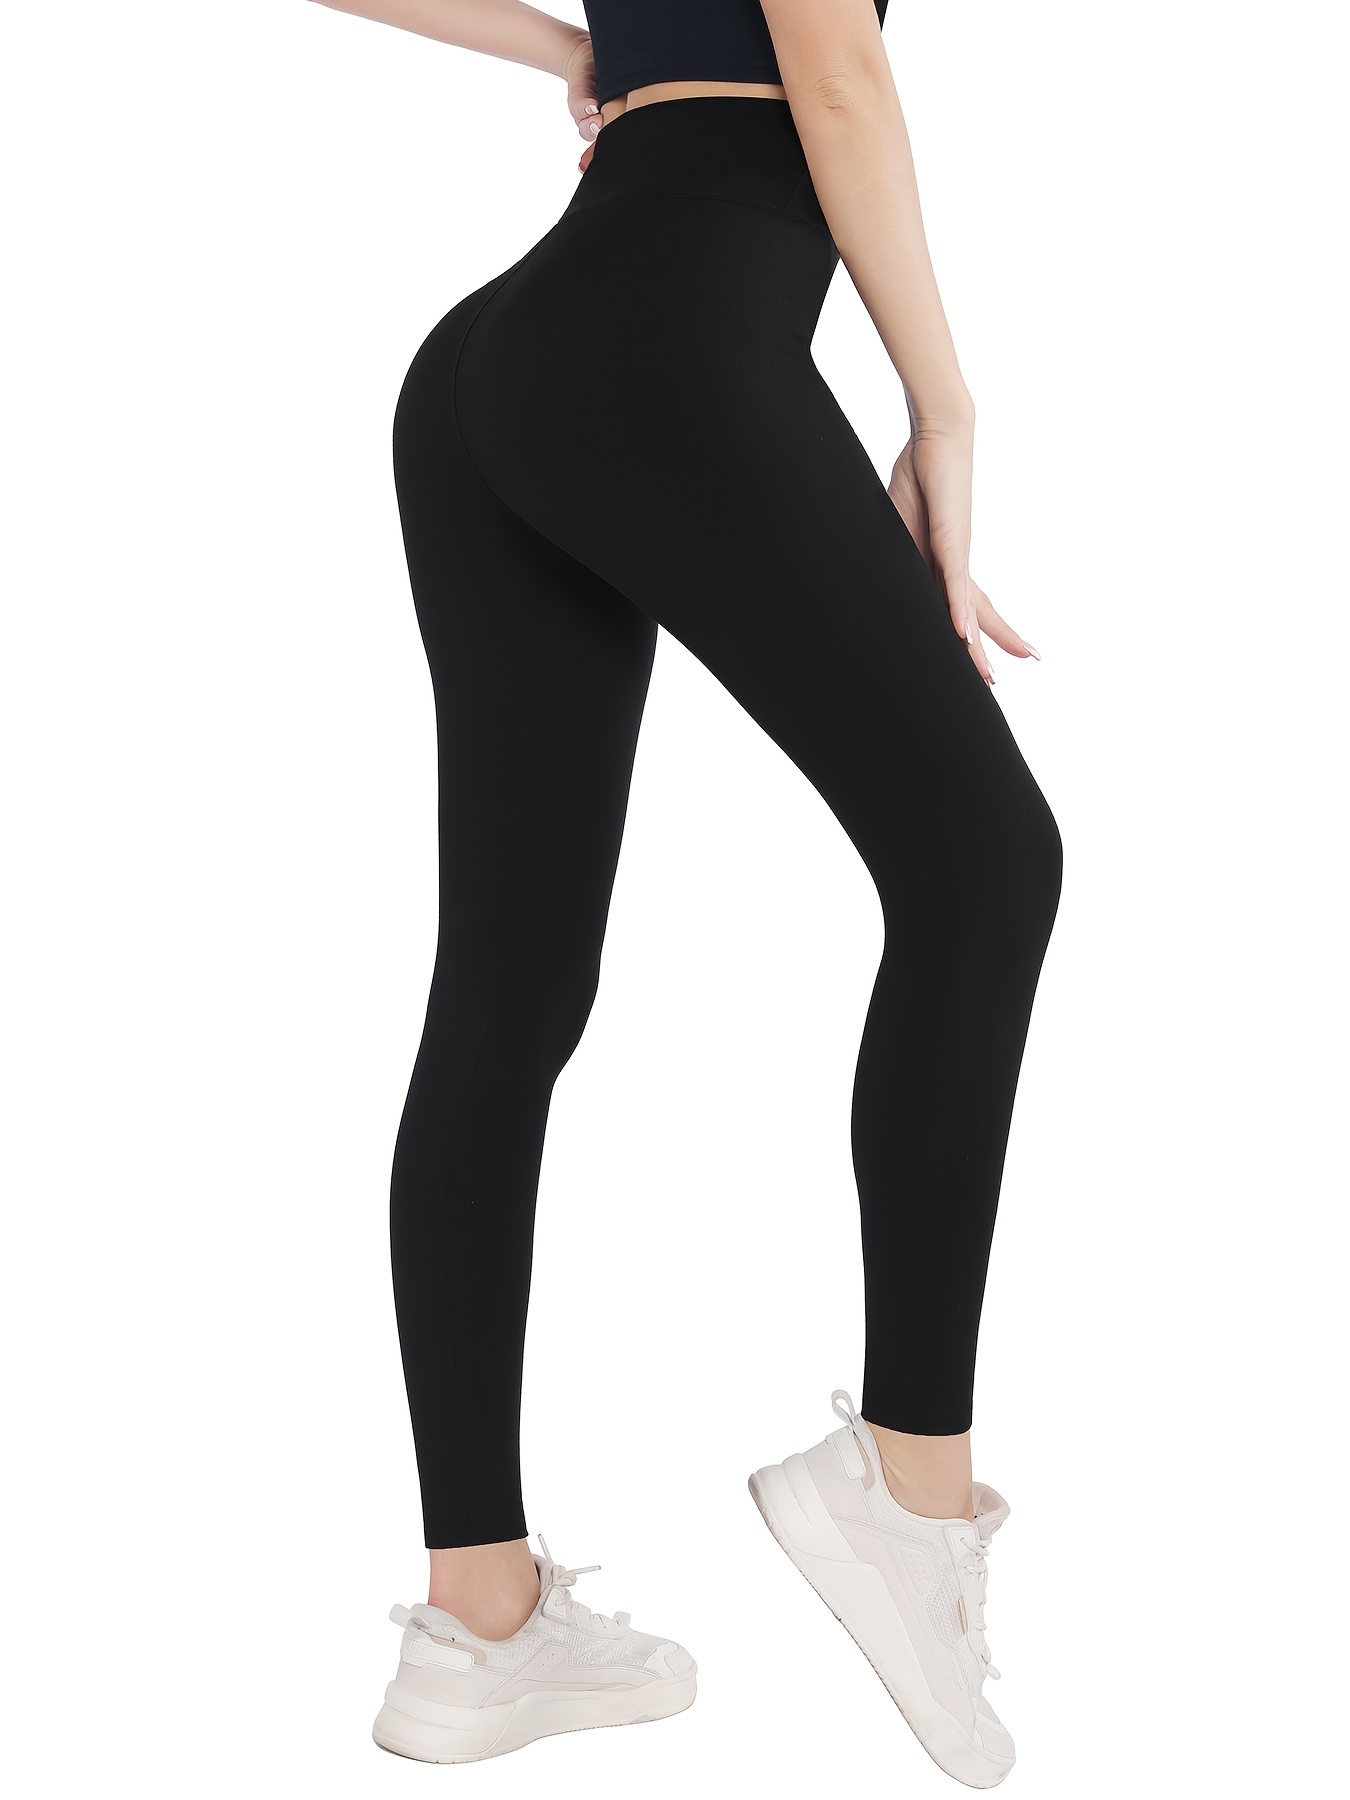 High Waist Black Trample Feet Black Thermal Leggings For Women 100 150kg  Autumn/Winter Solid Color Skinny Pants From Kong01, $9.25